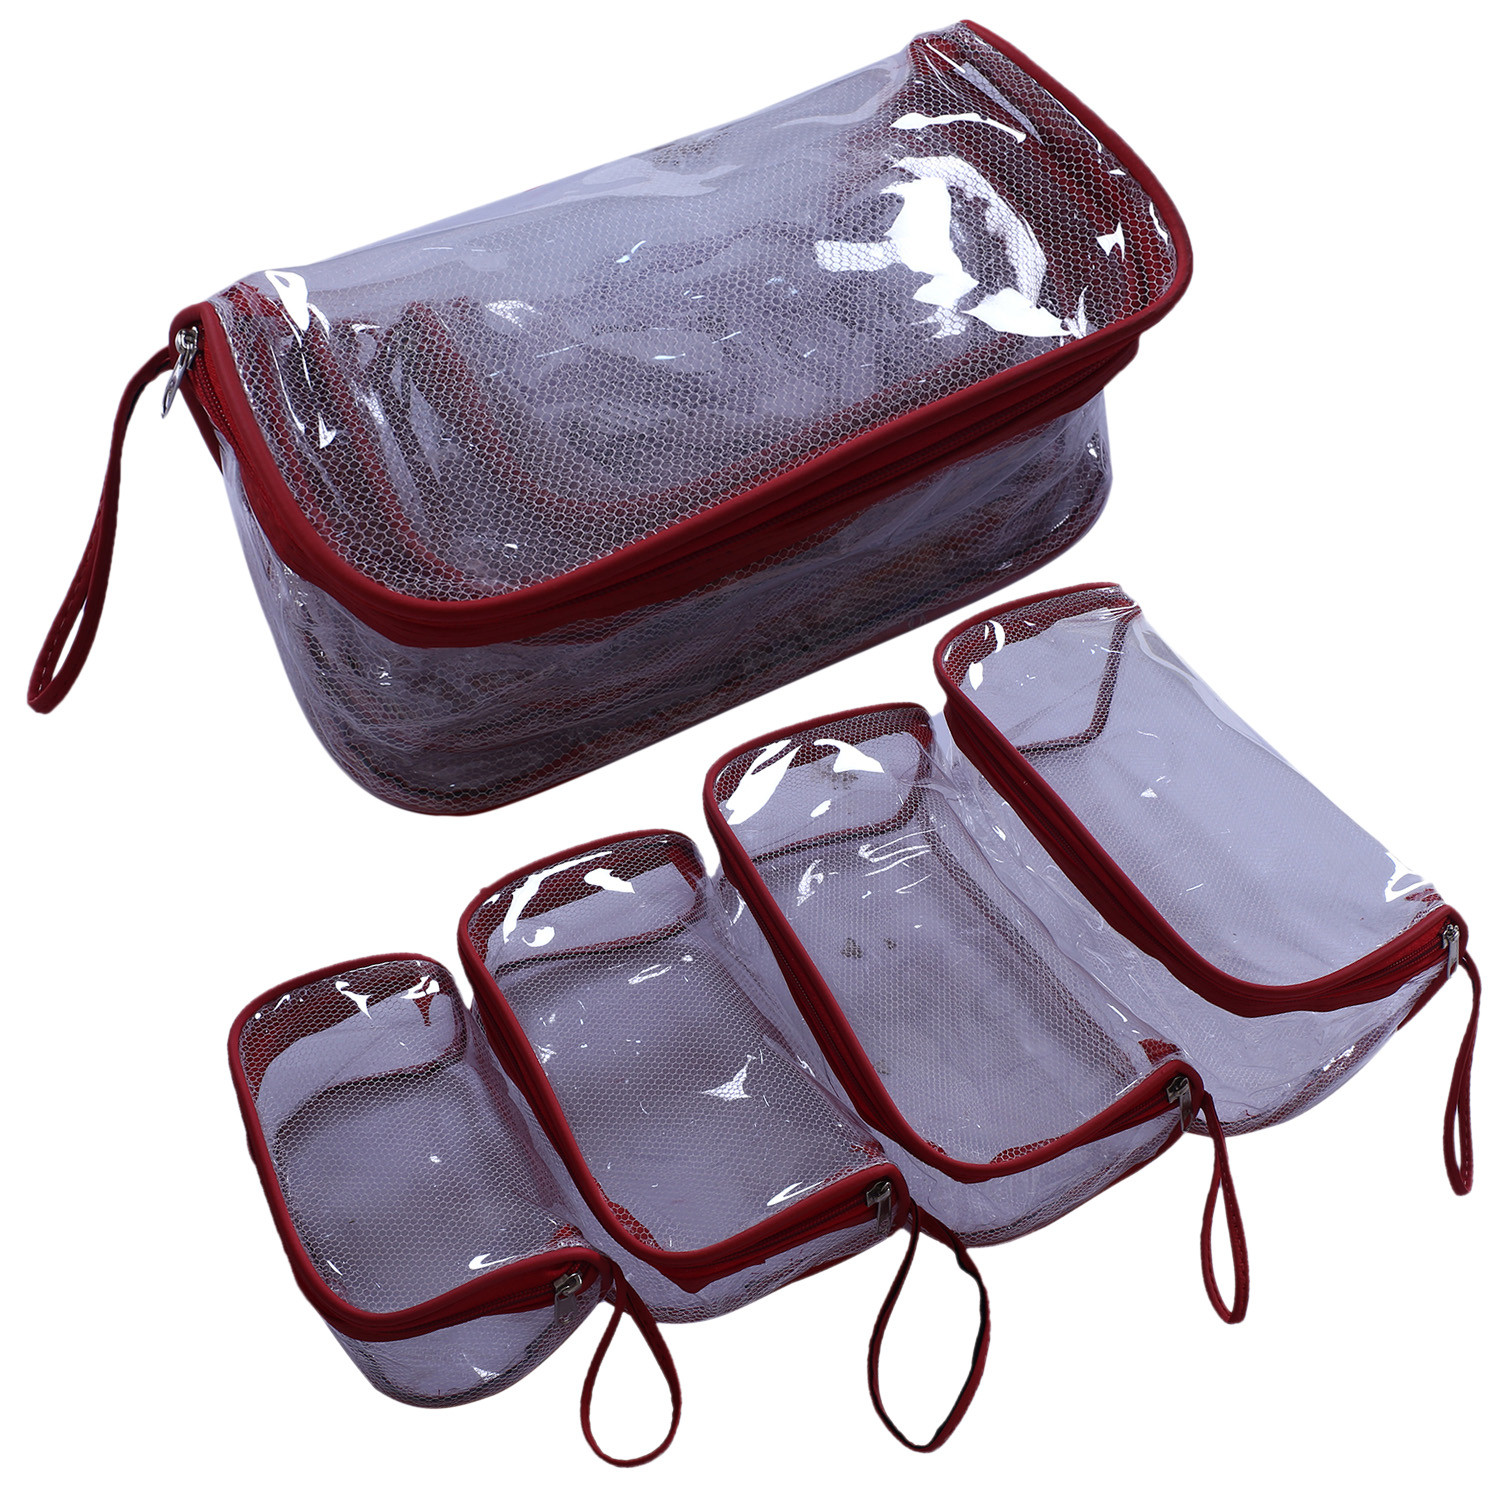 Kuber Industries Mesh Net Laminated Transparent Jewellery Kit |Vanity Pouch For Home & Travel With Handle,1 Set of 4 Pouch (Red)